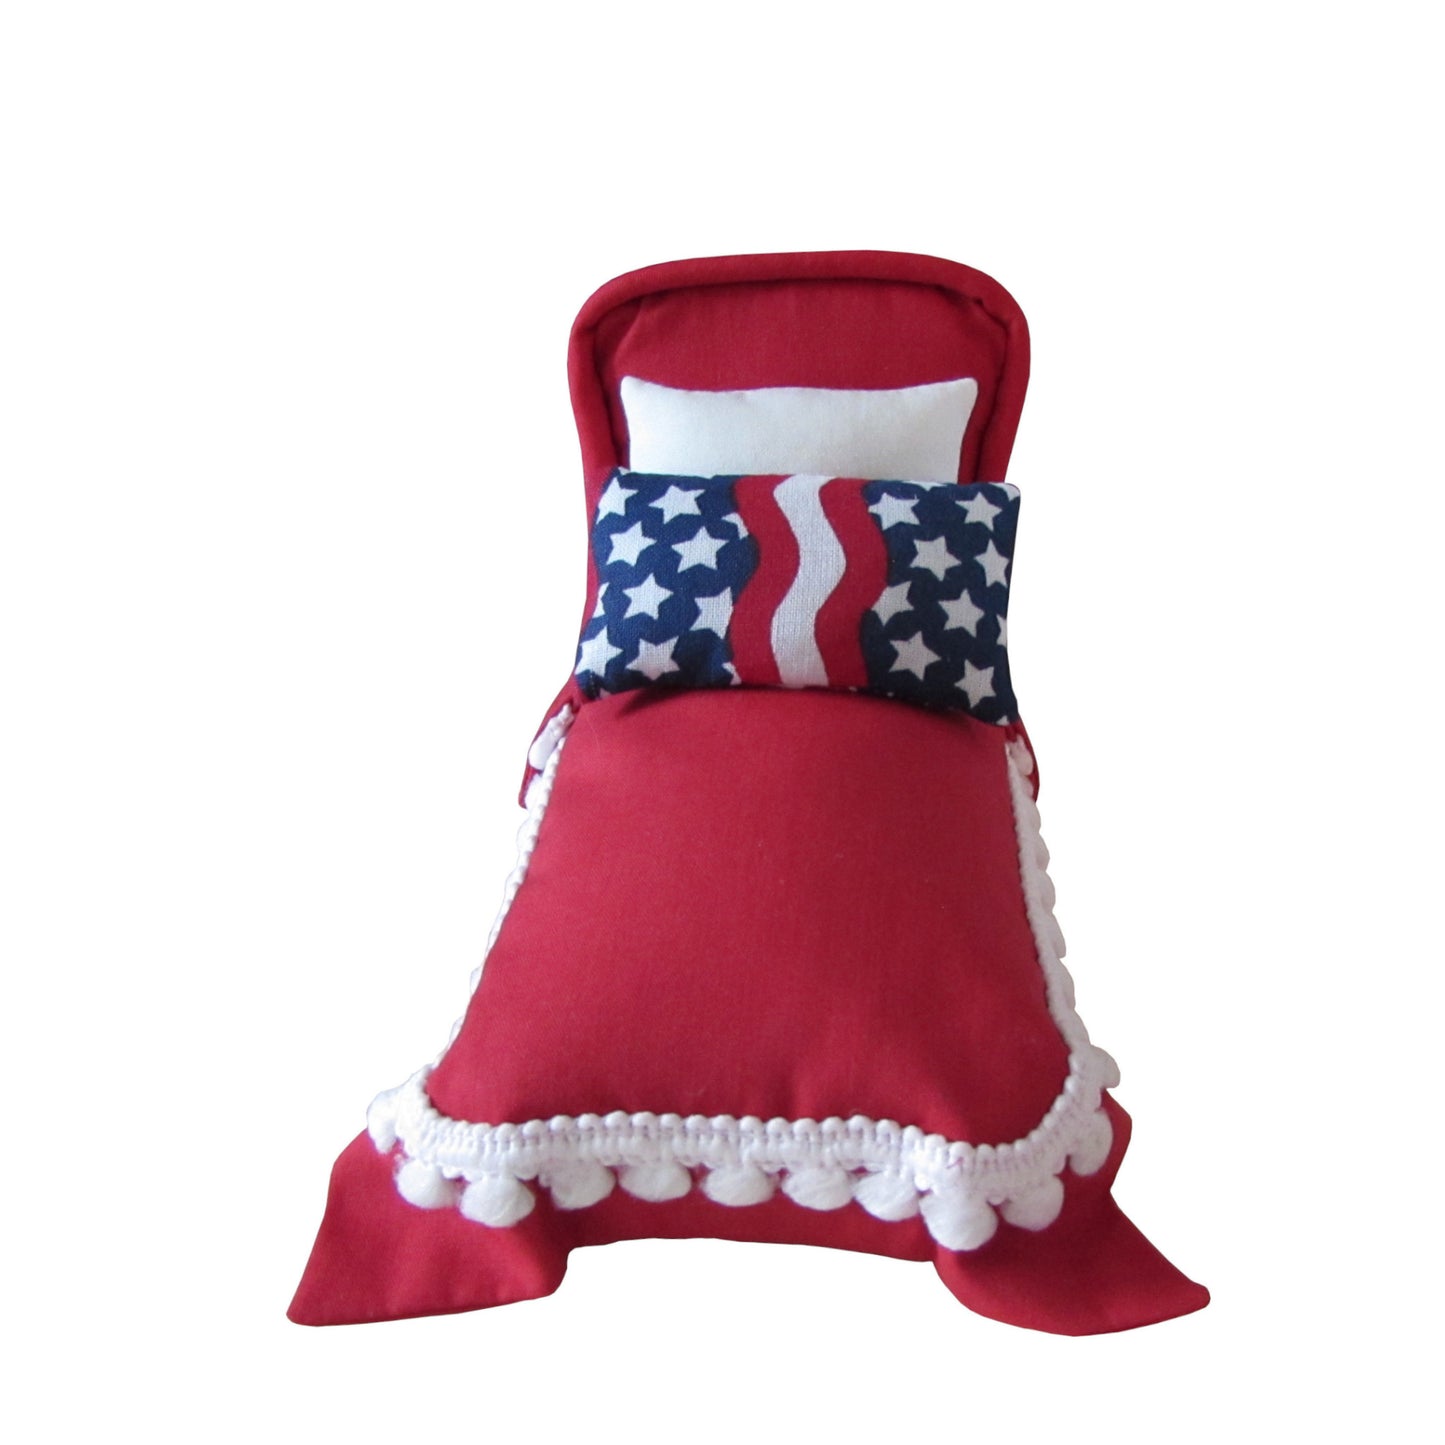 Red Pincushion Bed with Stars and Stripes Pillow Front view